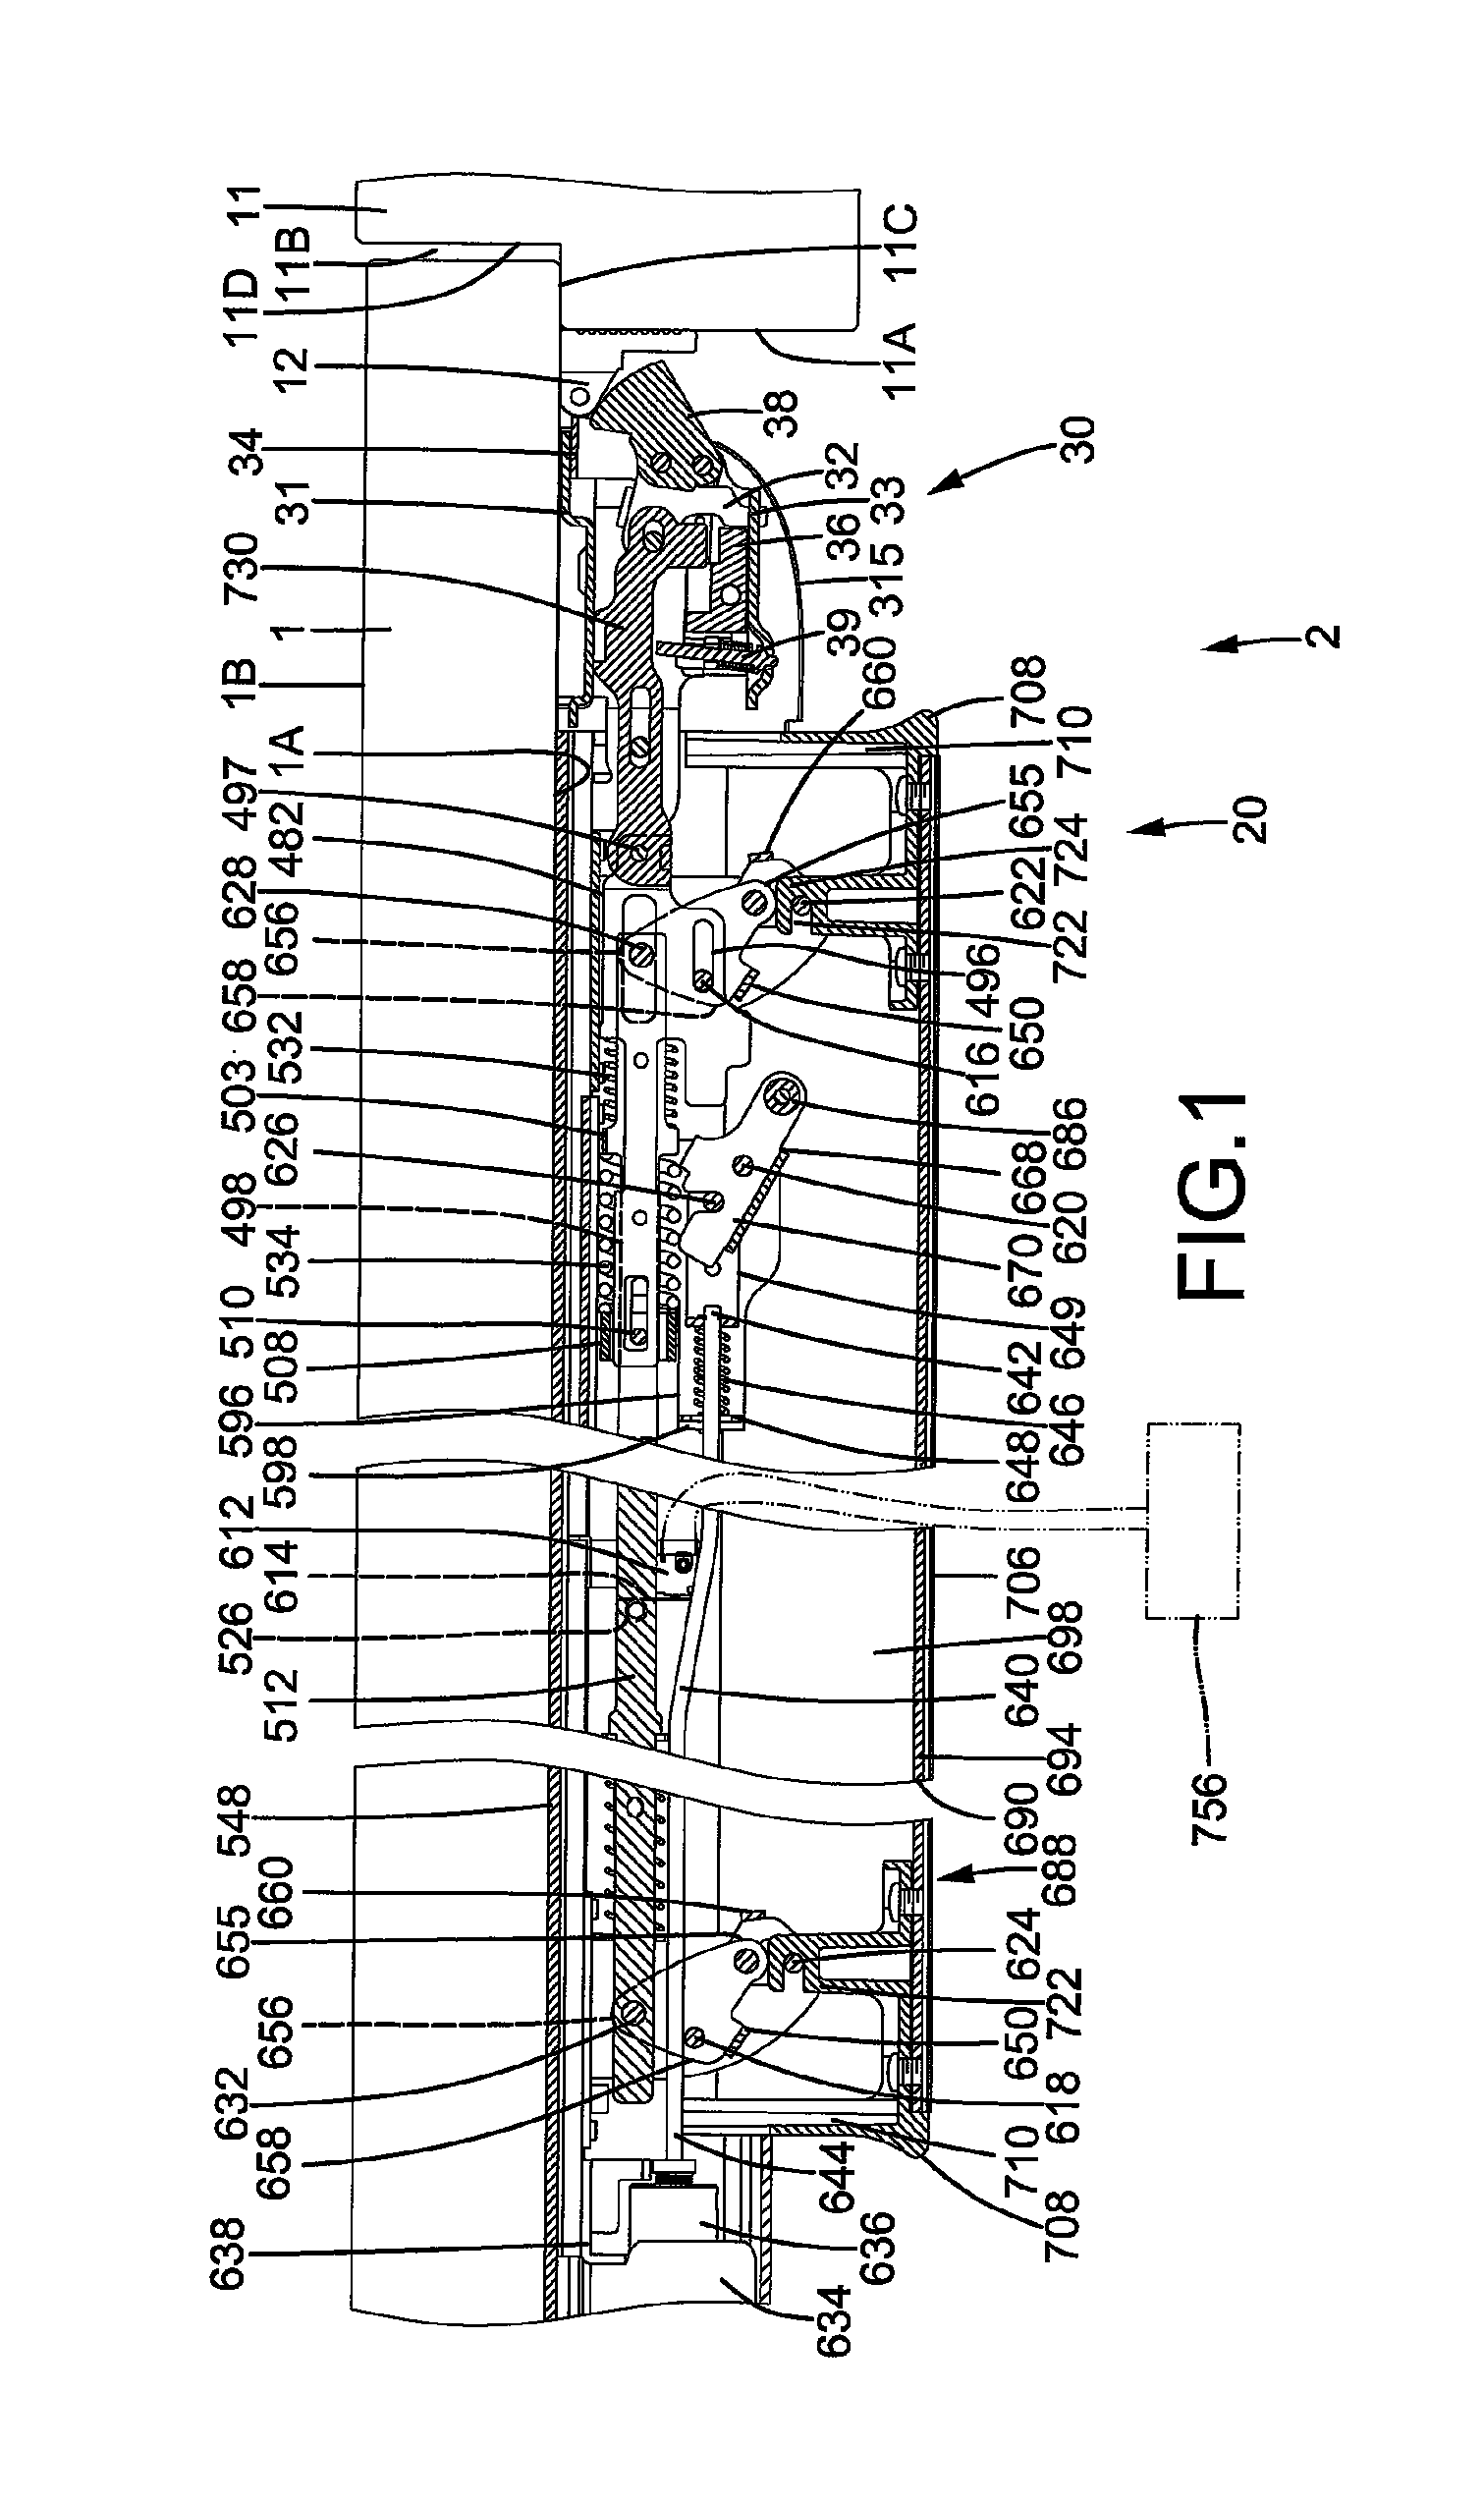 Door lock with idle travel in a locking state